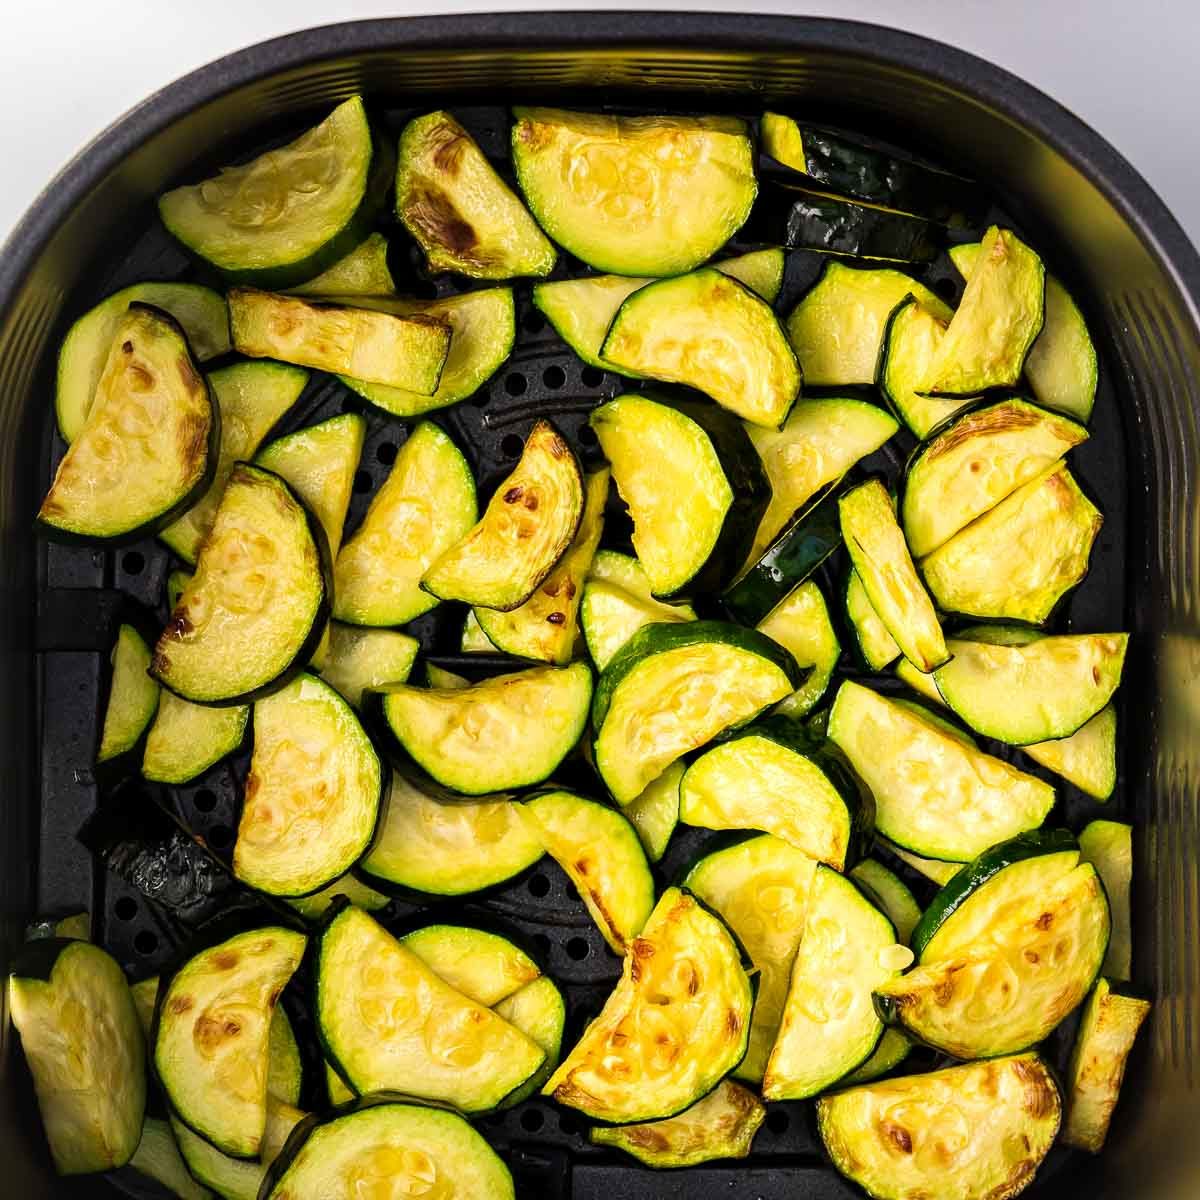 Air fryer zucchini featured image